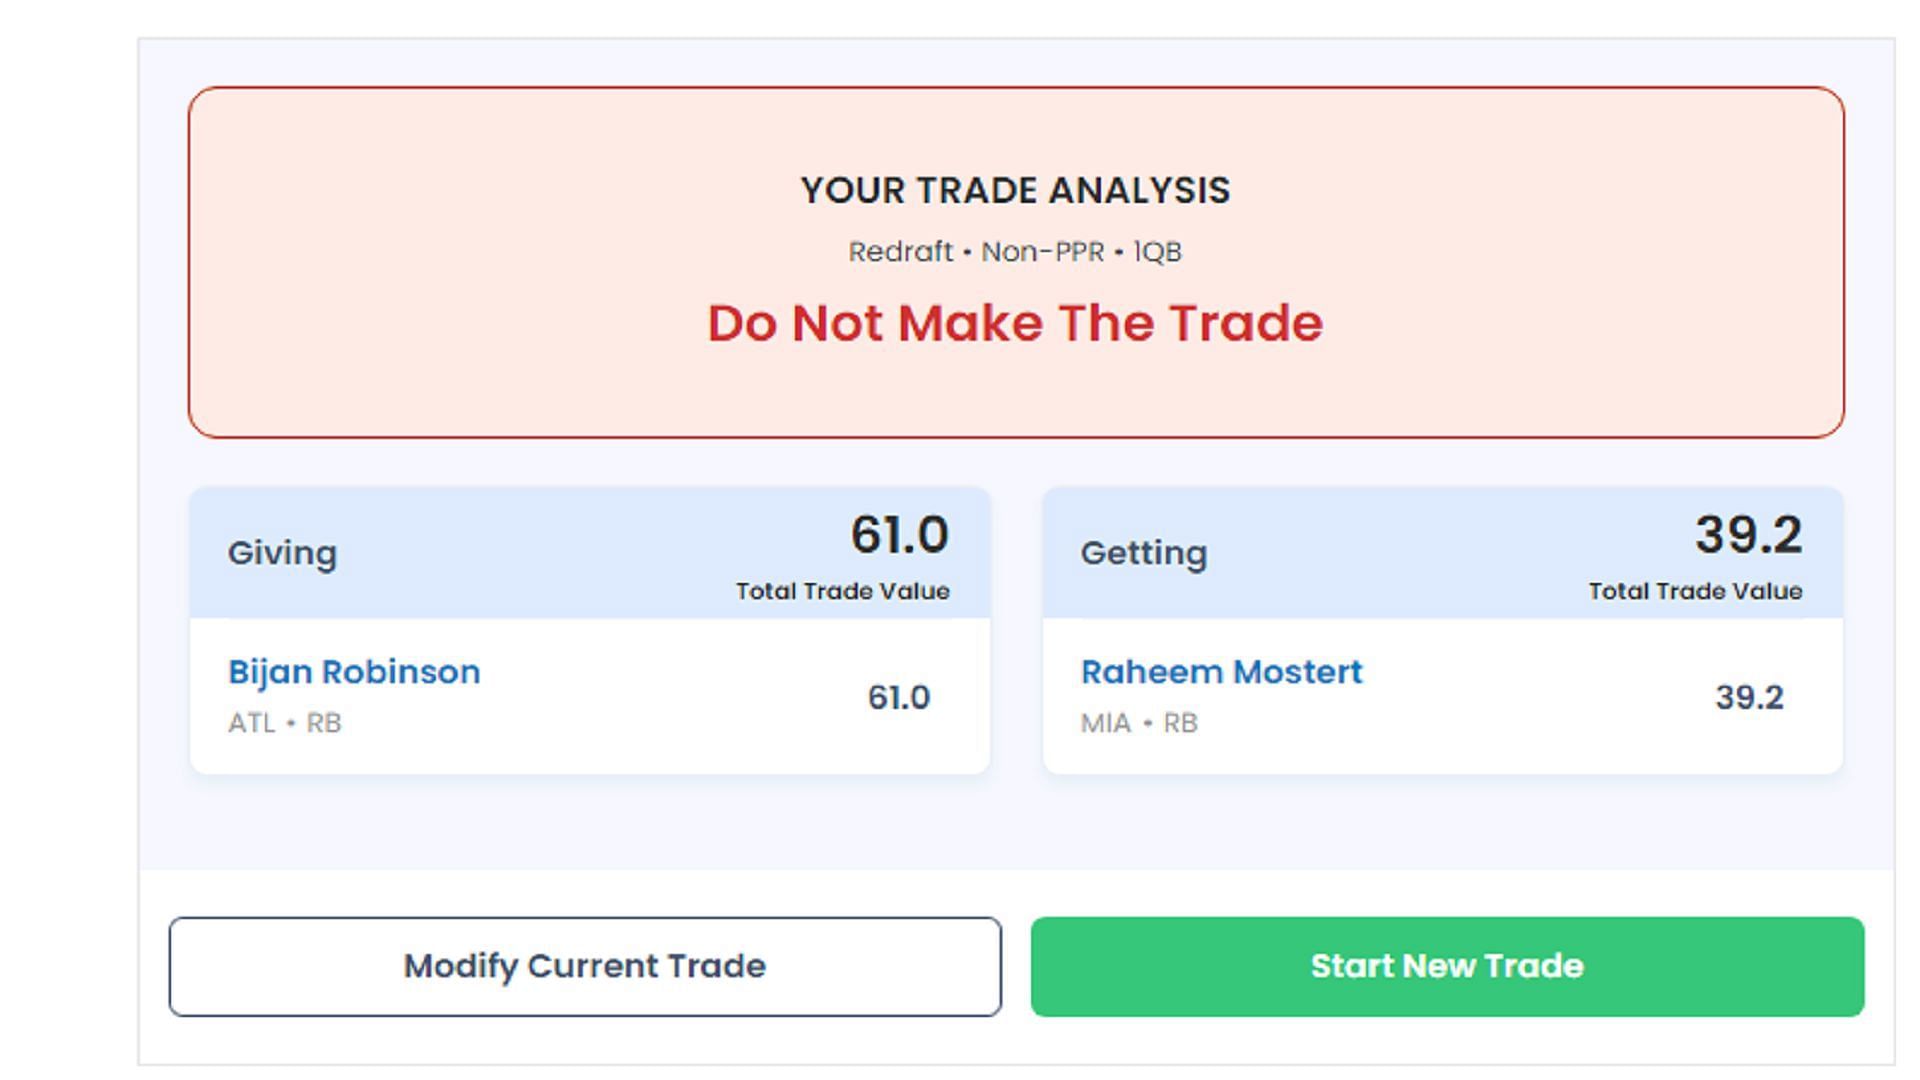 Trade results for Raheem Mostert